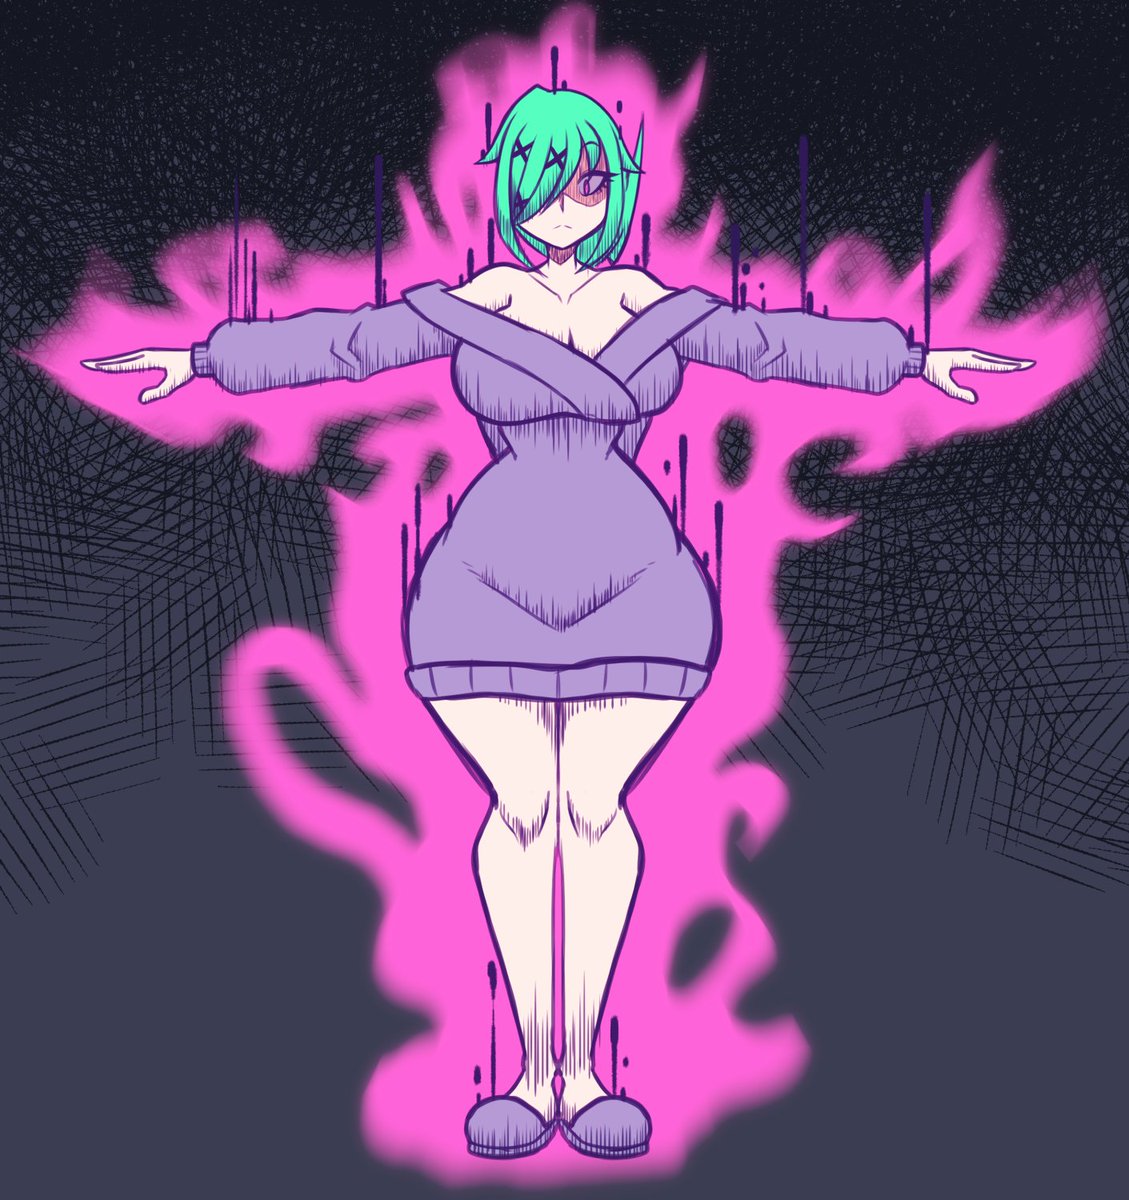 Repent of your sins, T-pose Booky has come to destroy you. 